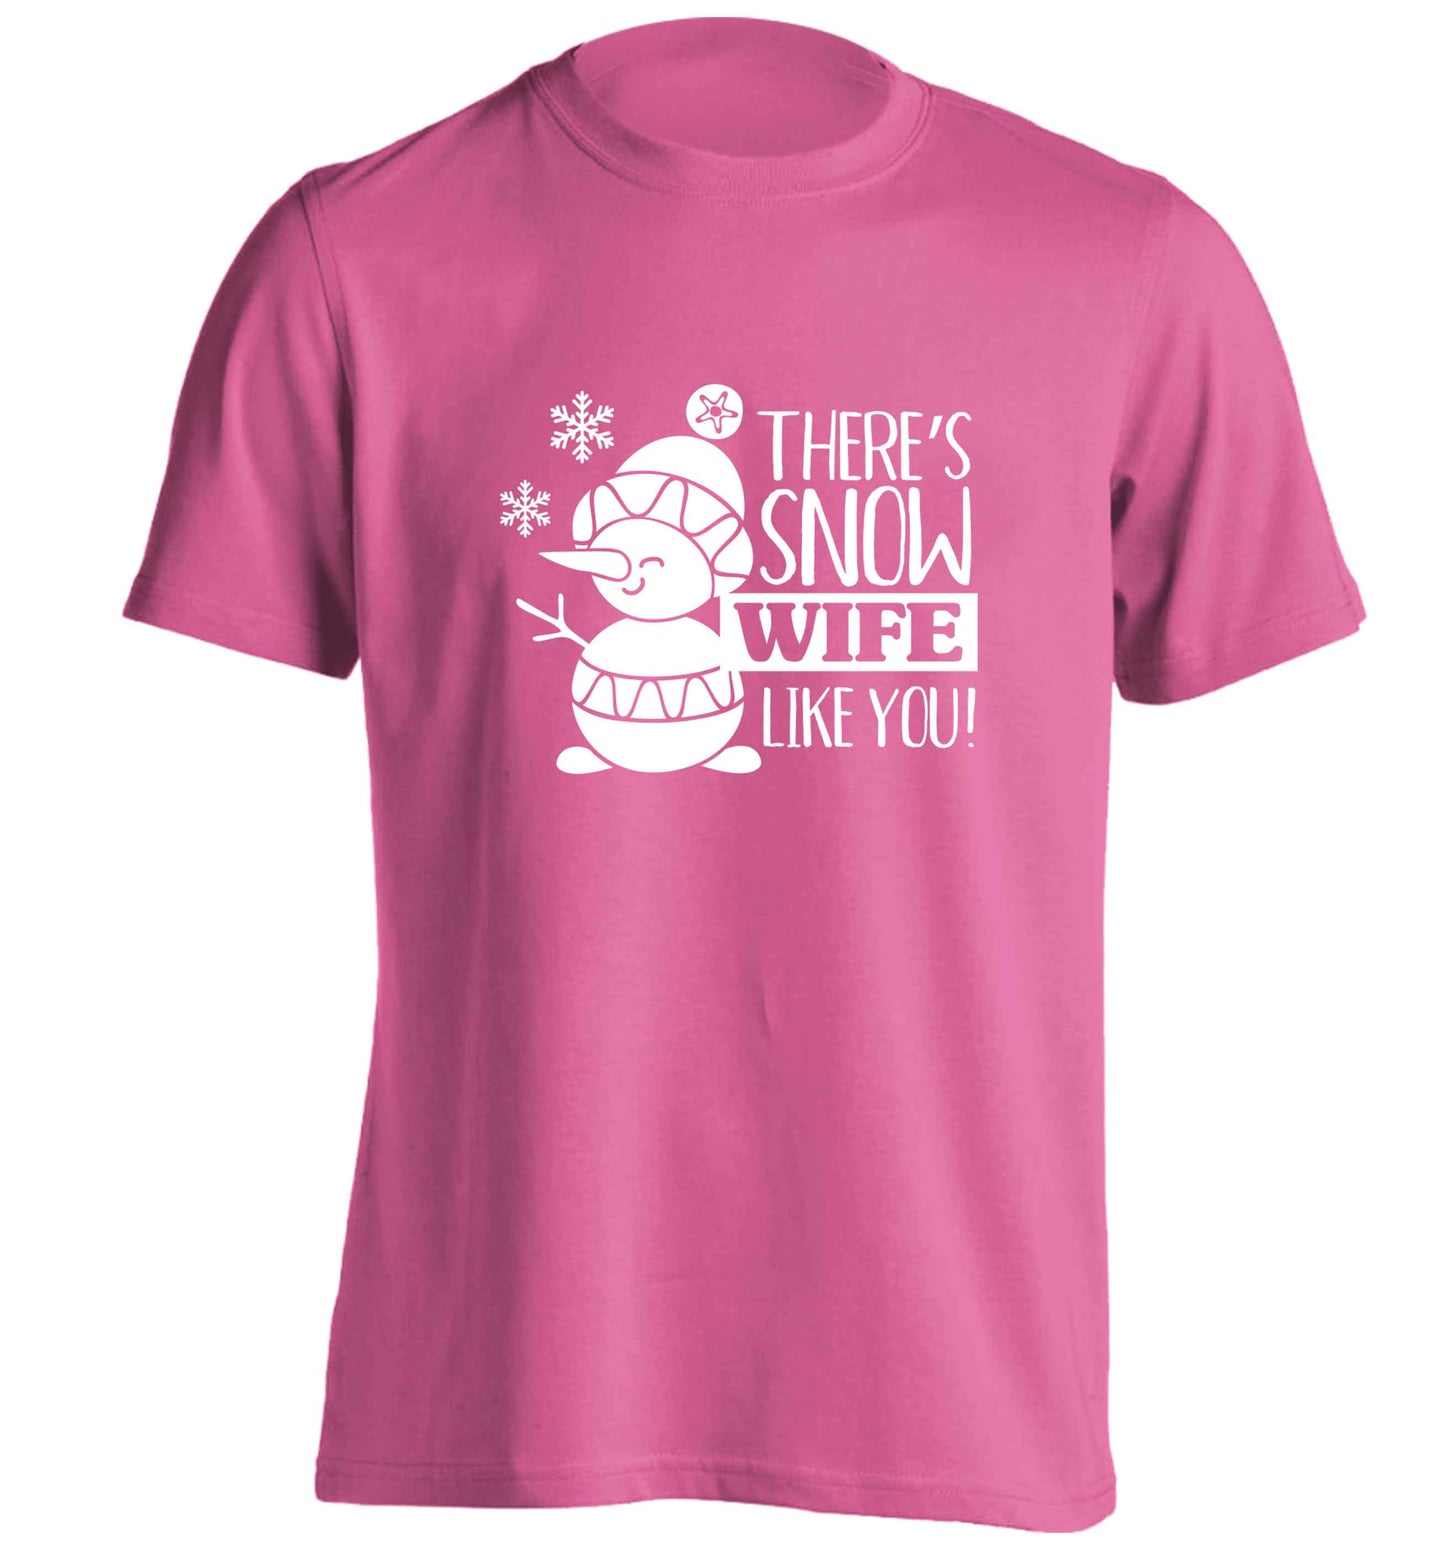 There's snow wife like you adults unisex pink Tshirt 2XL